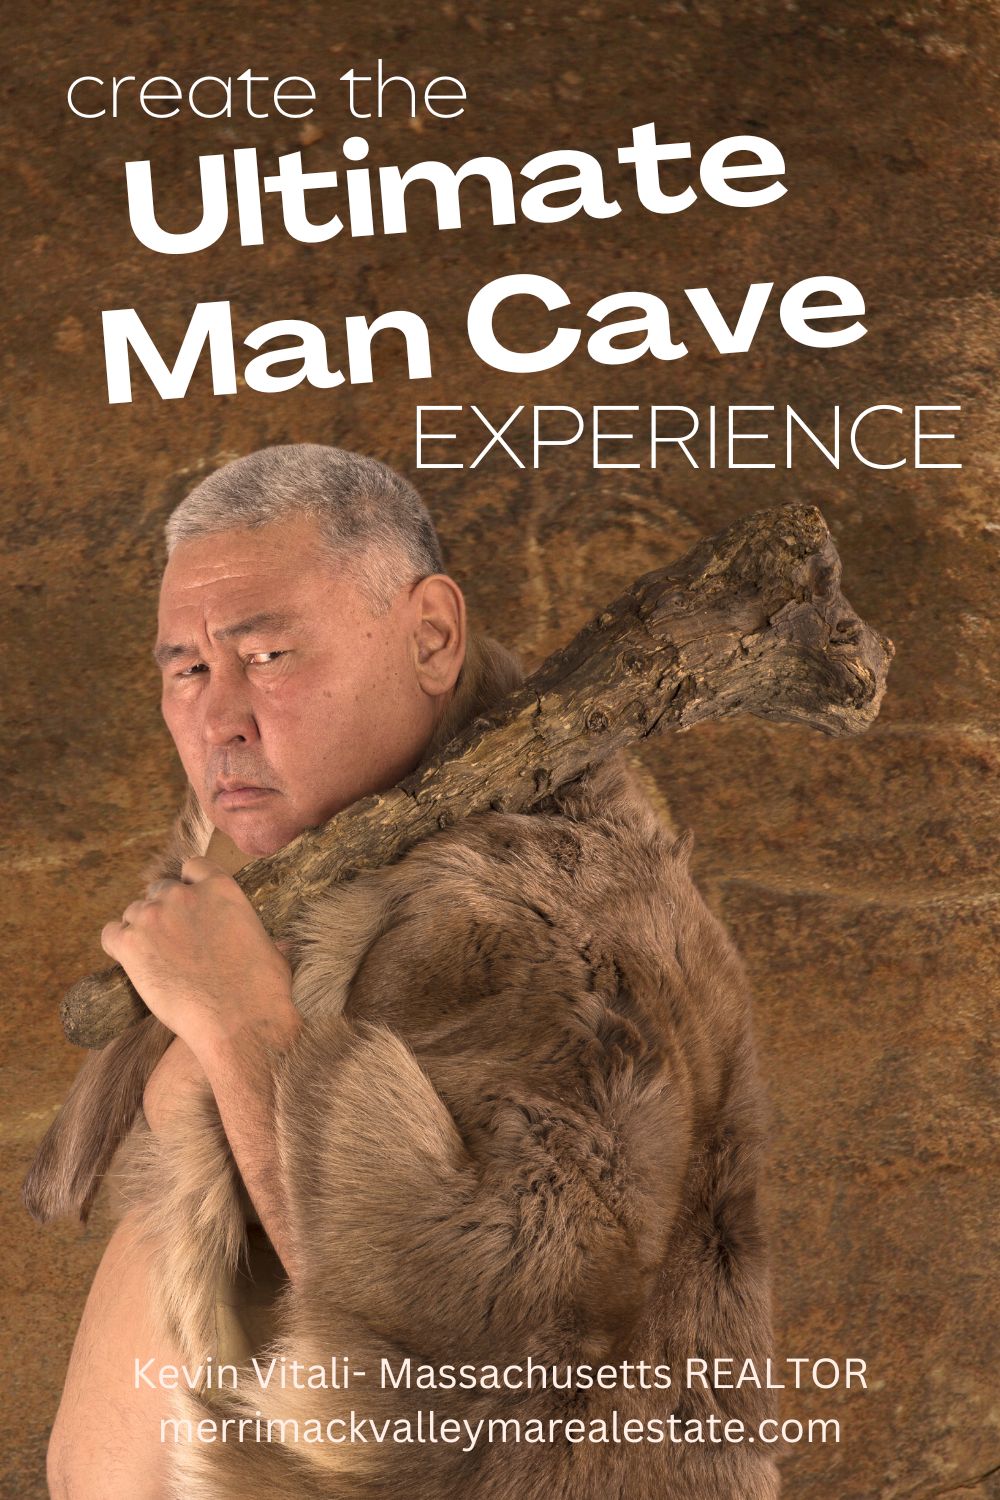 man cave 101- get man cave ideas and tips